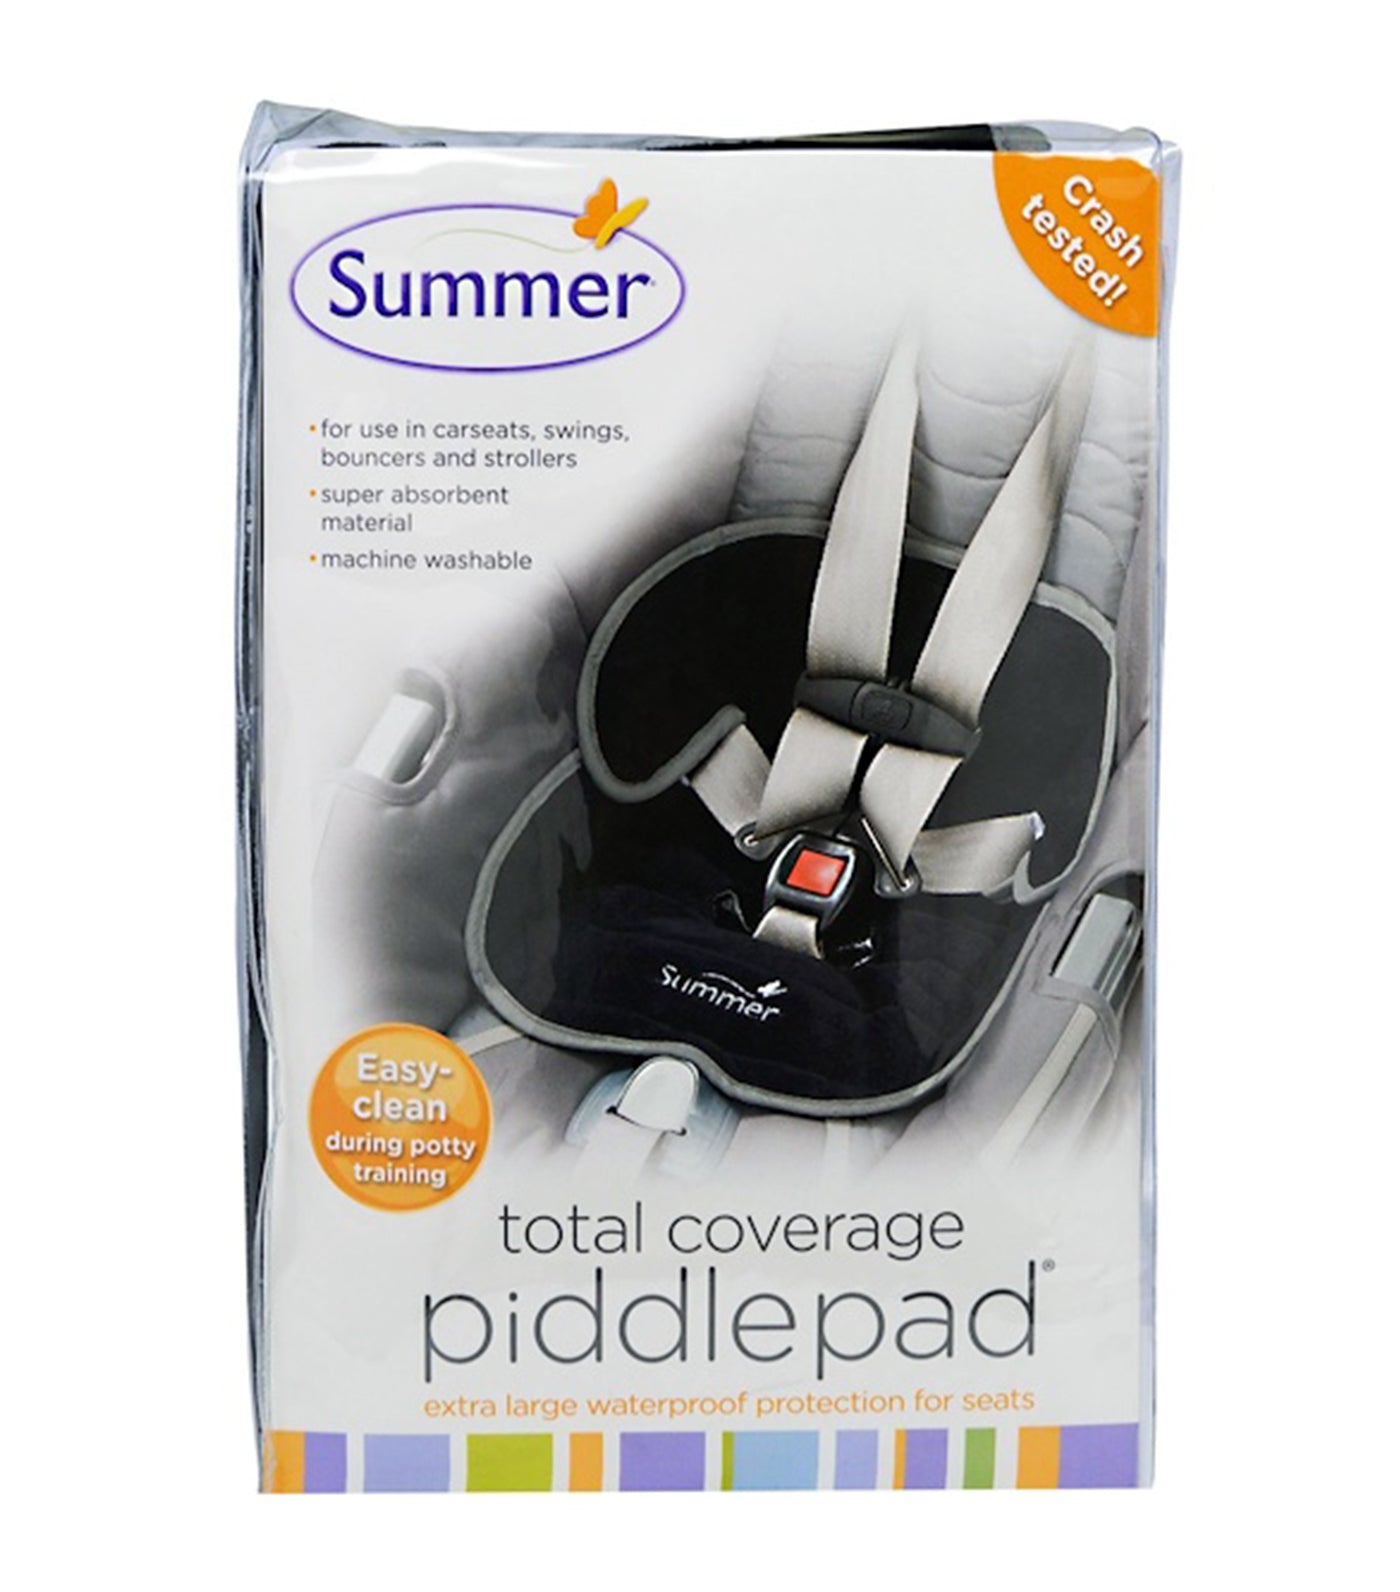 summer total coverage piddlepad®